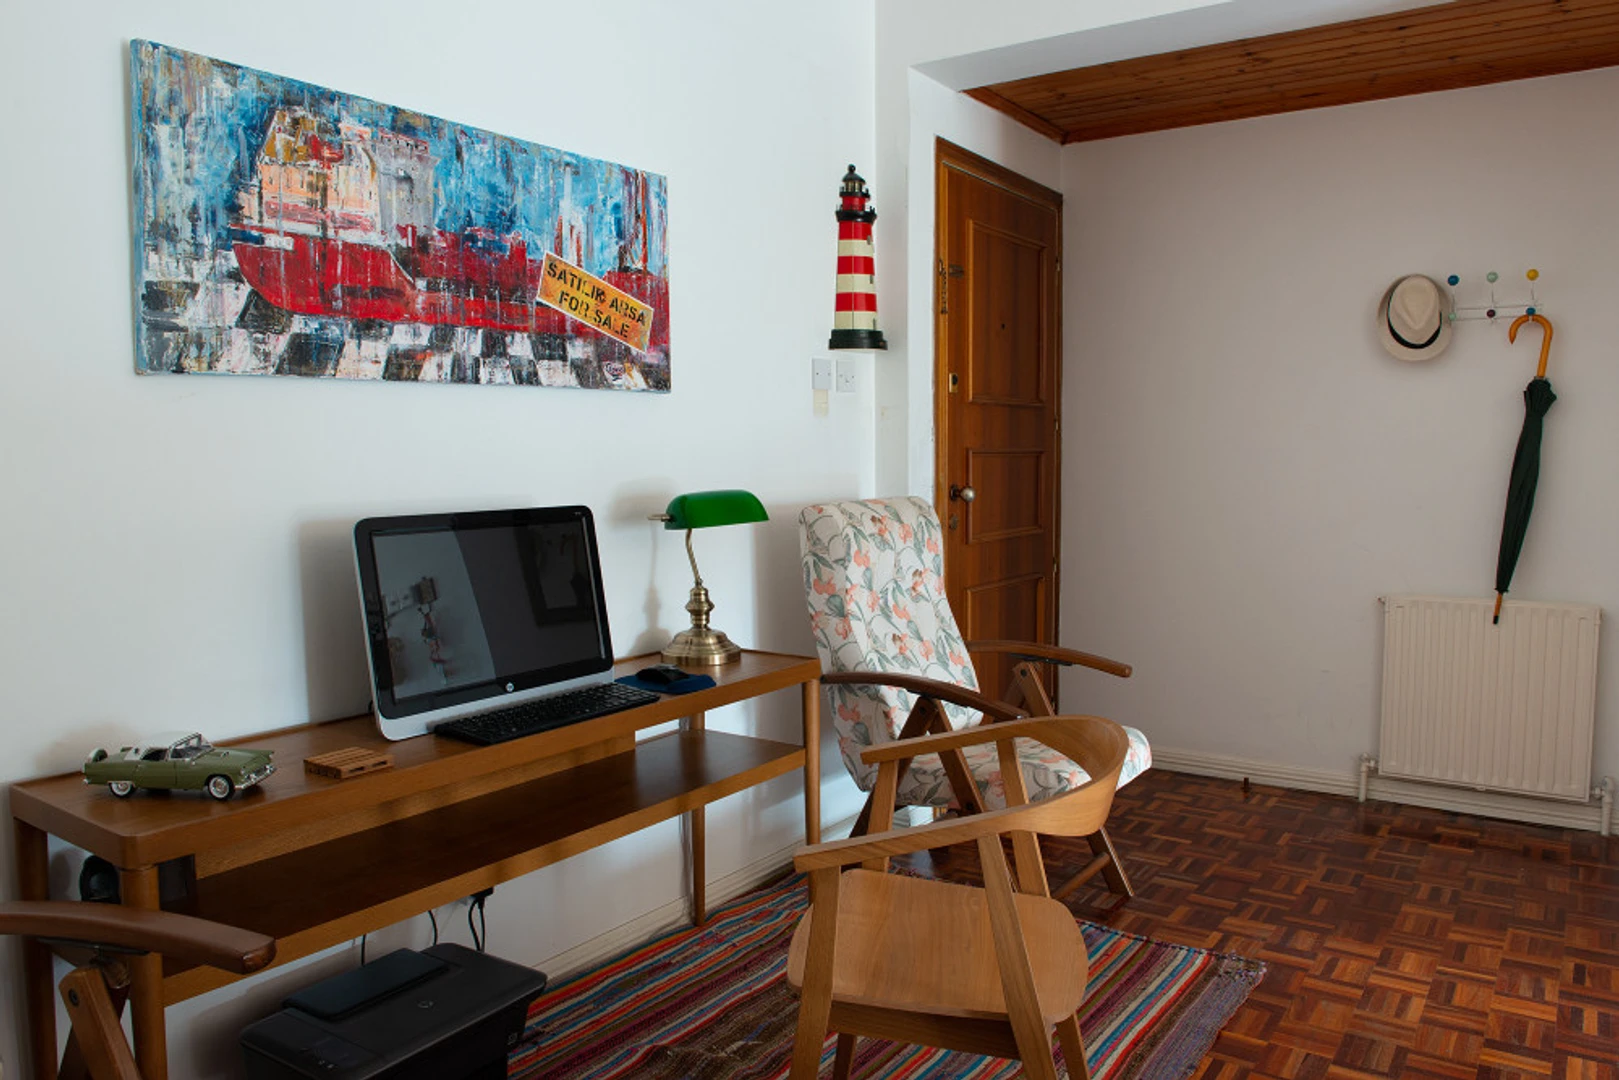 Accommodation in the centre of Nicosia